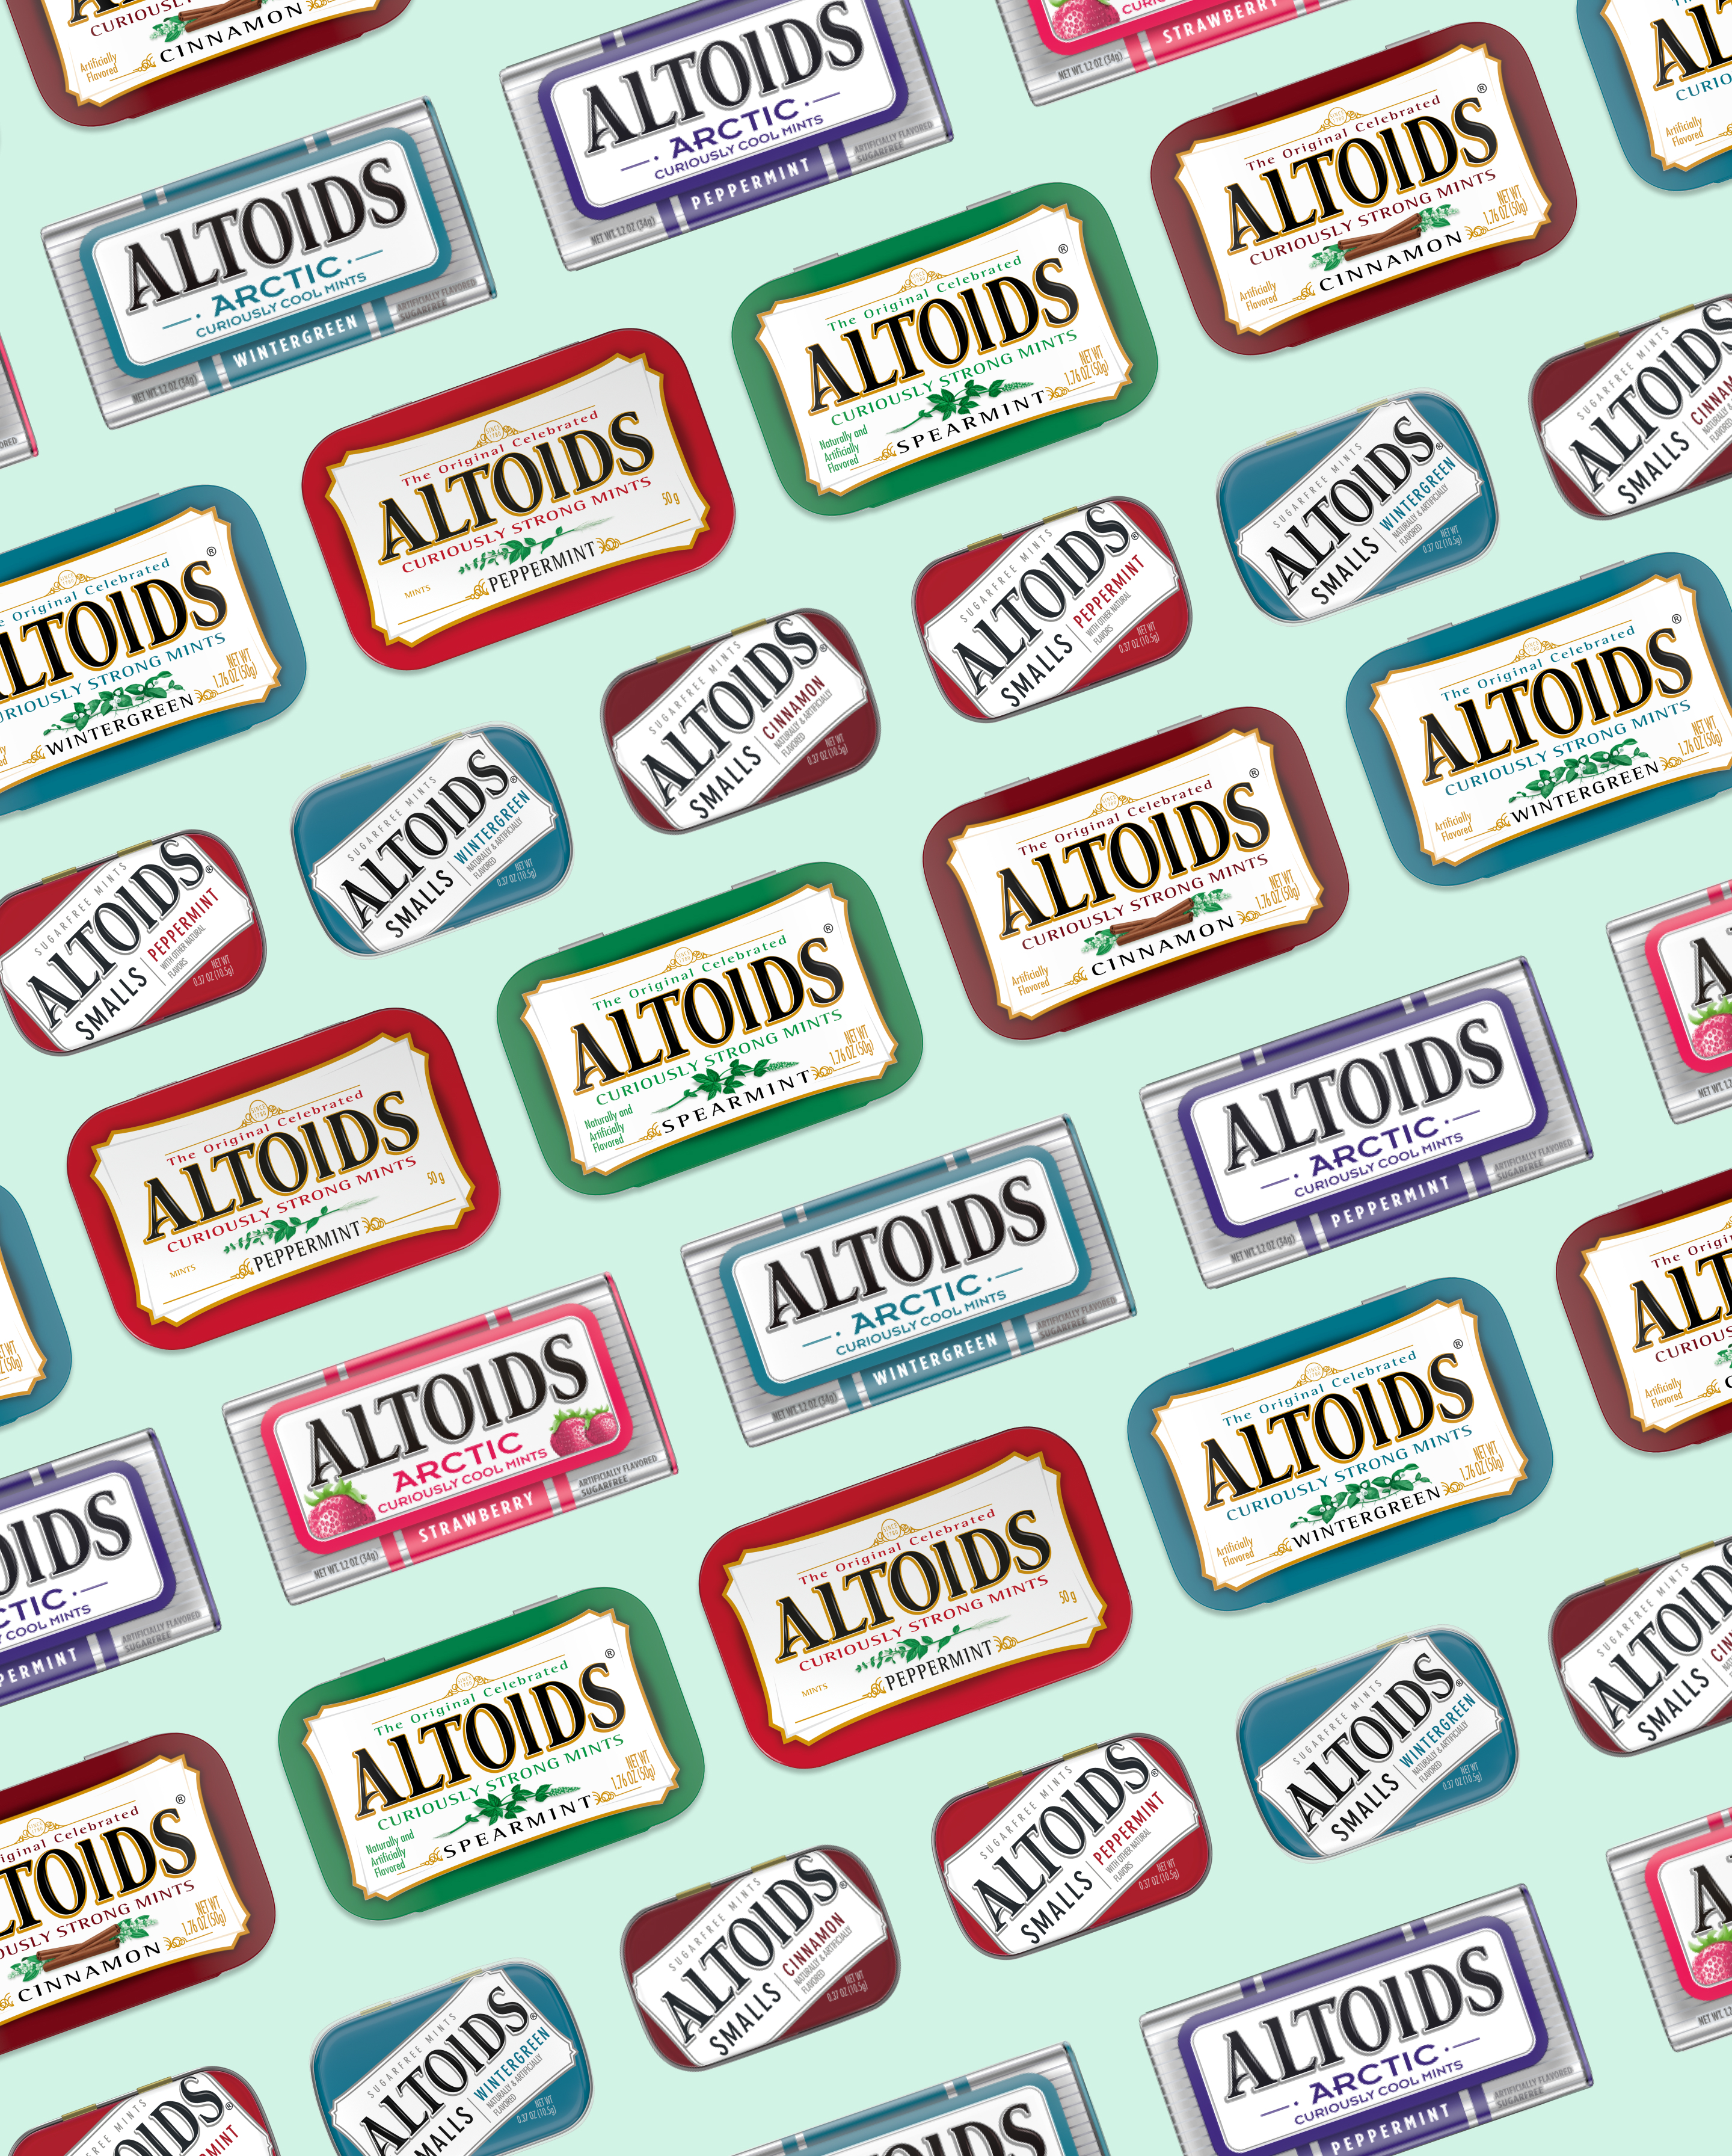 Altoids product tins lined up on a mint green background